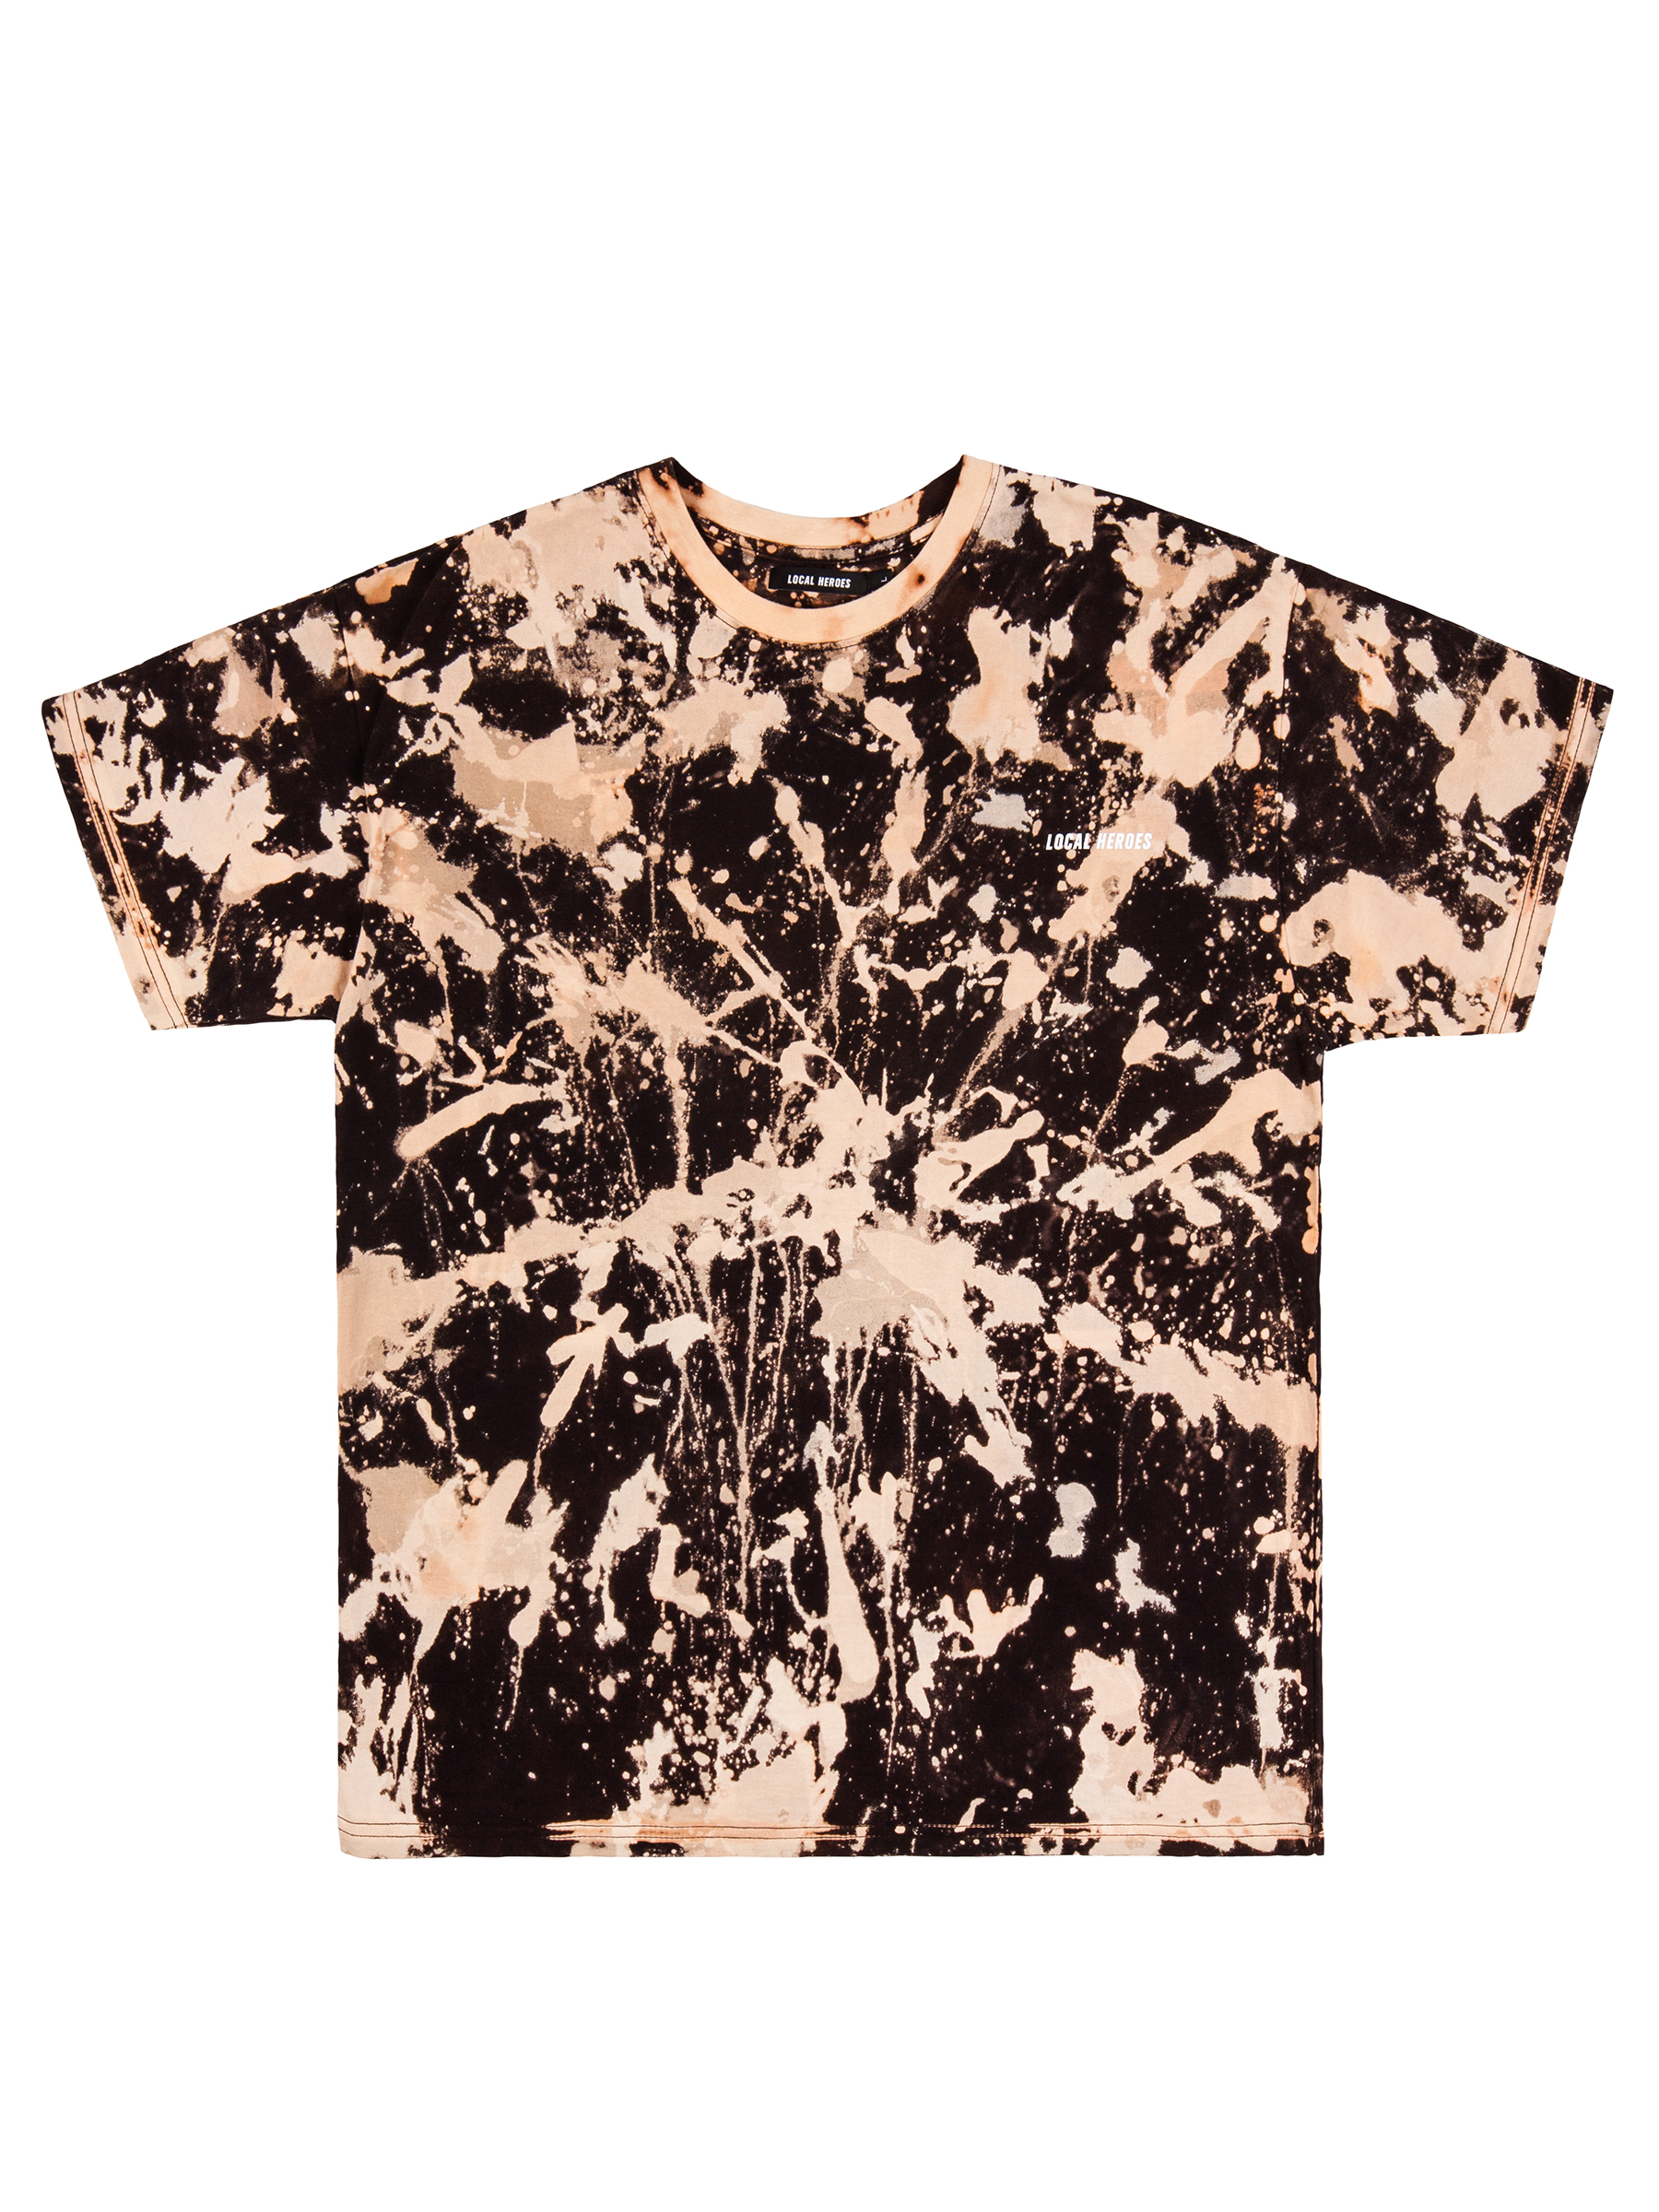 LH RATED ADULTS TIE DYE TEE